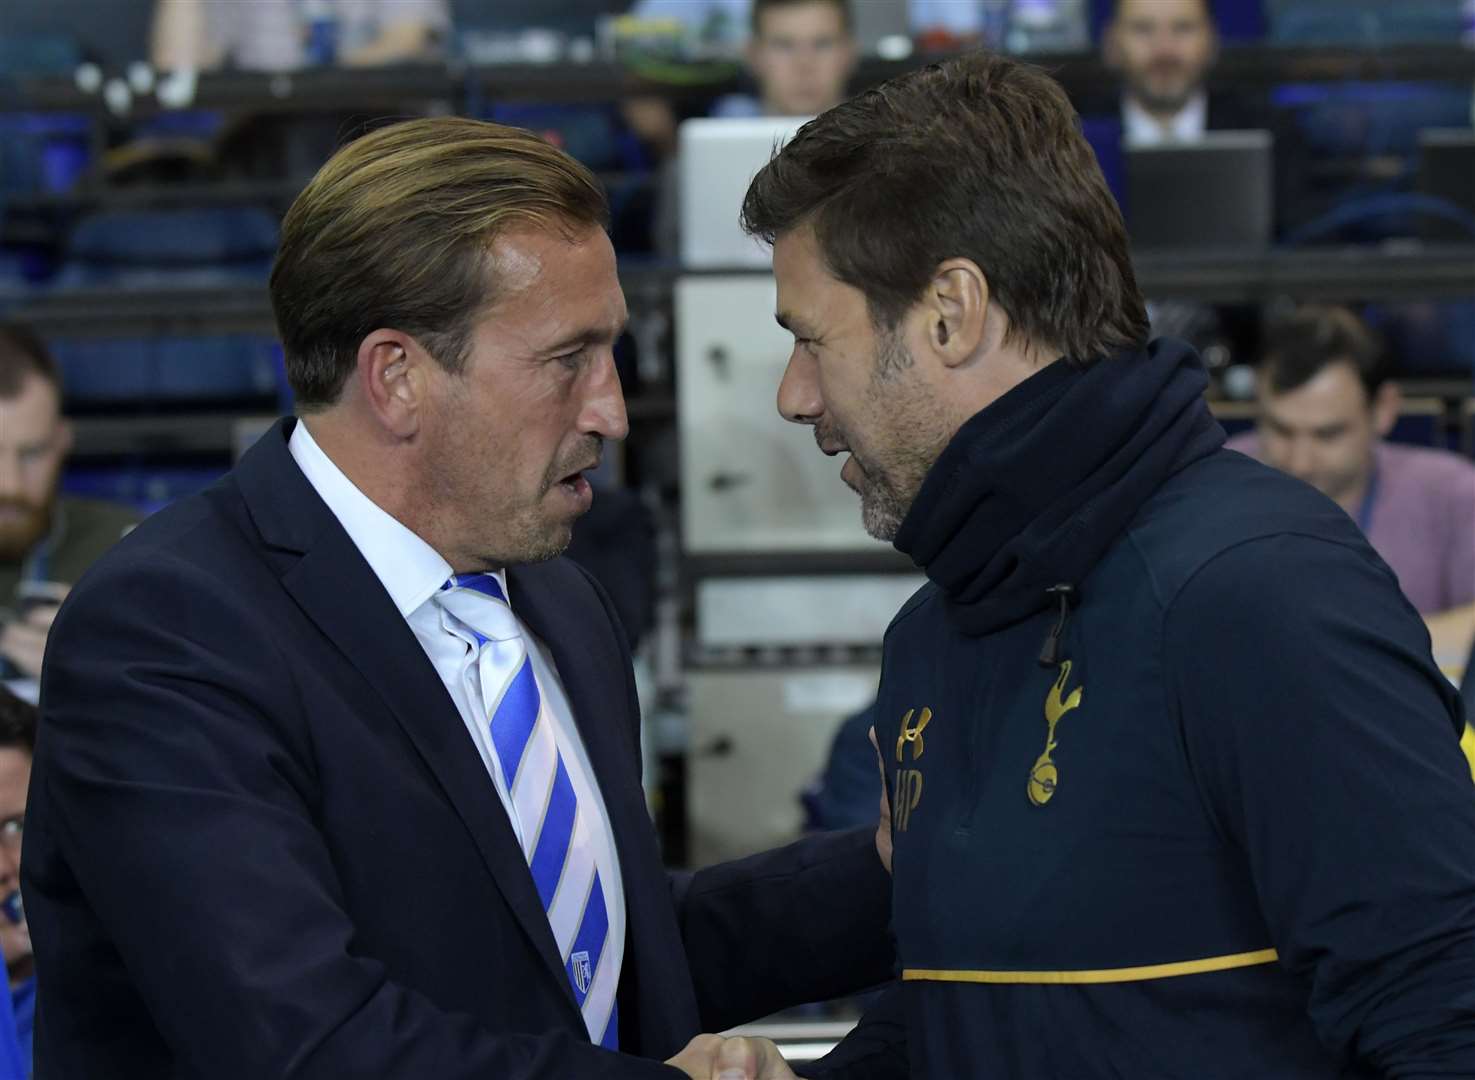 Justin Edinburgh shakes hands with Spurs manager Mauricio Pochettino back in 2016 when the Gills took on Tottenham Hotspur in the EFL Cup at White Hart Lane Picture: Barry Goodwin